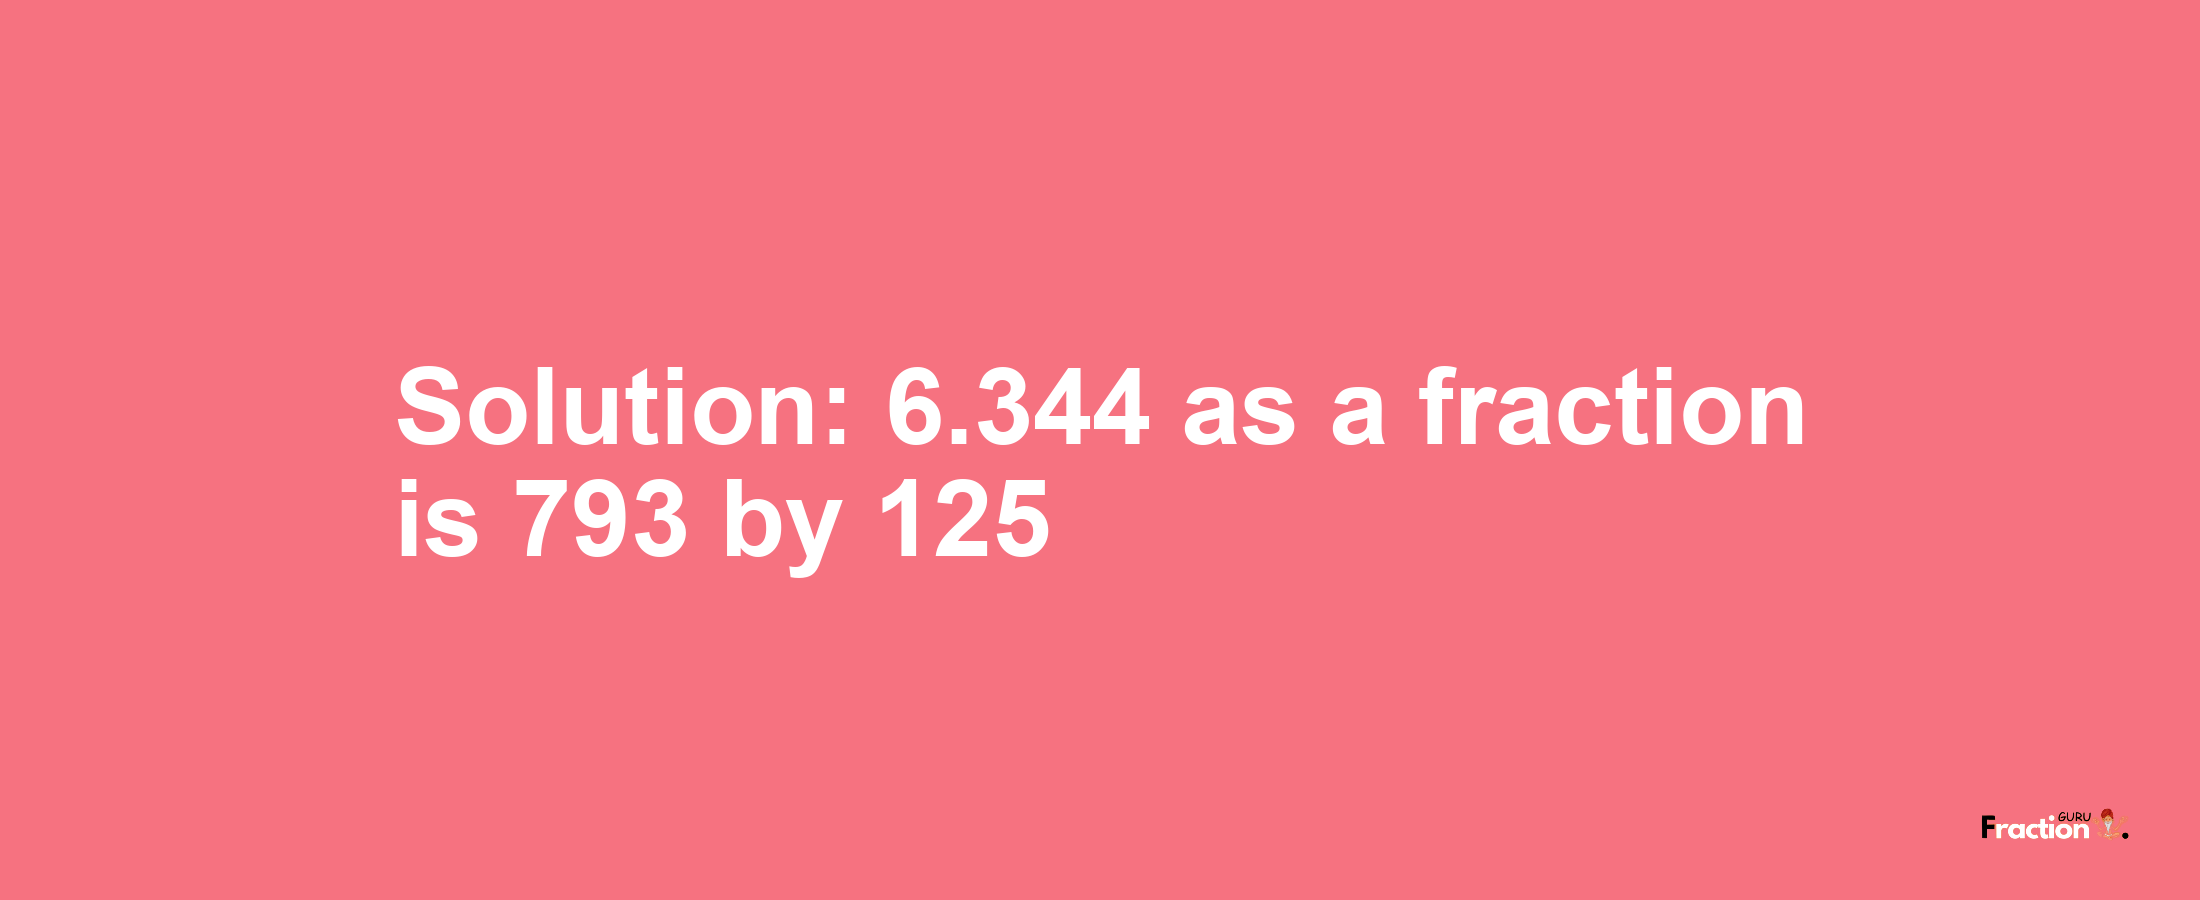 Solution:6.344 as a fraction is 793/125